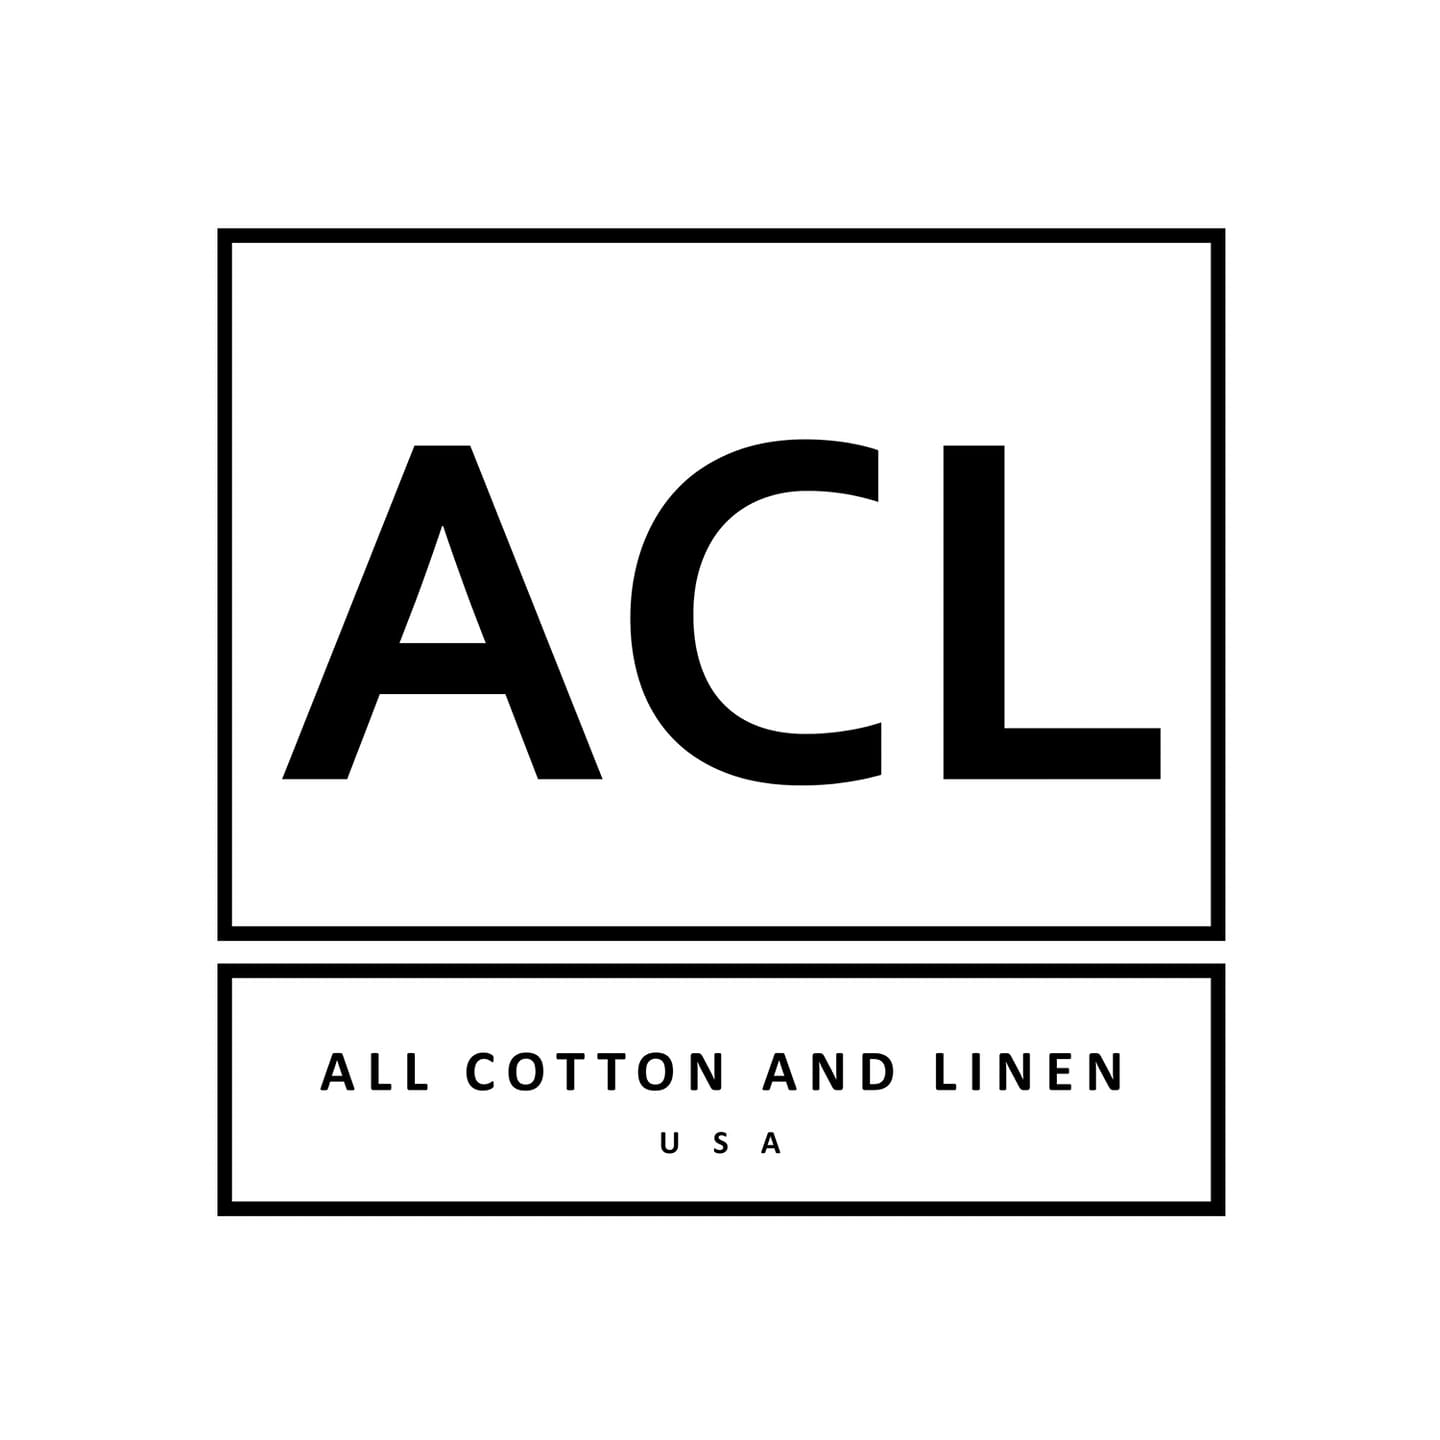 10% Off your entire purchase on All Cotton and Linen